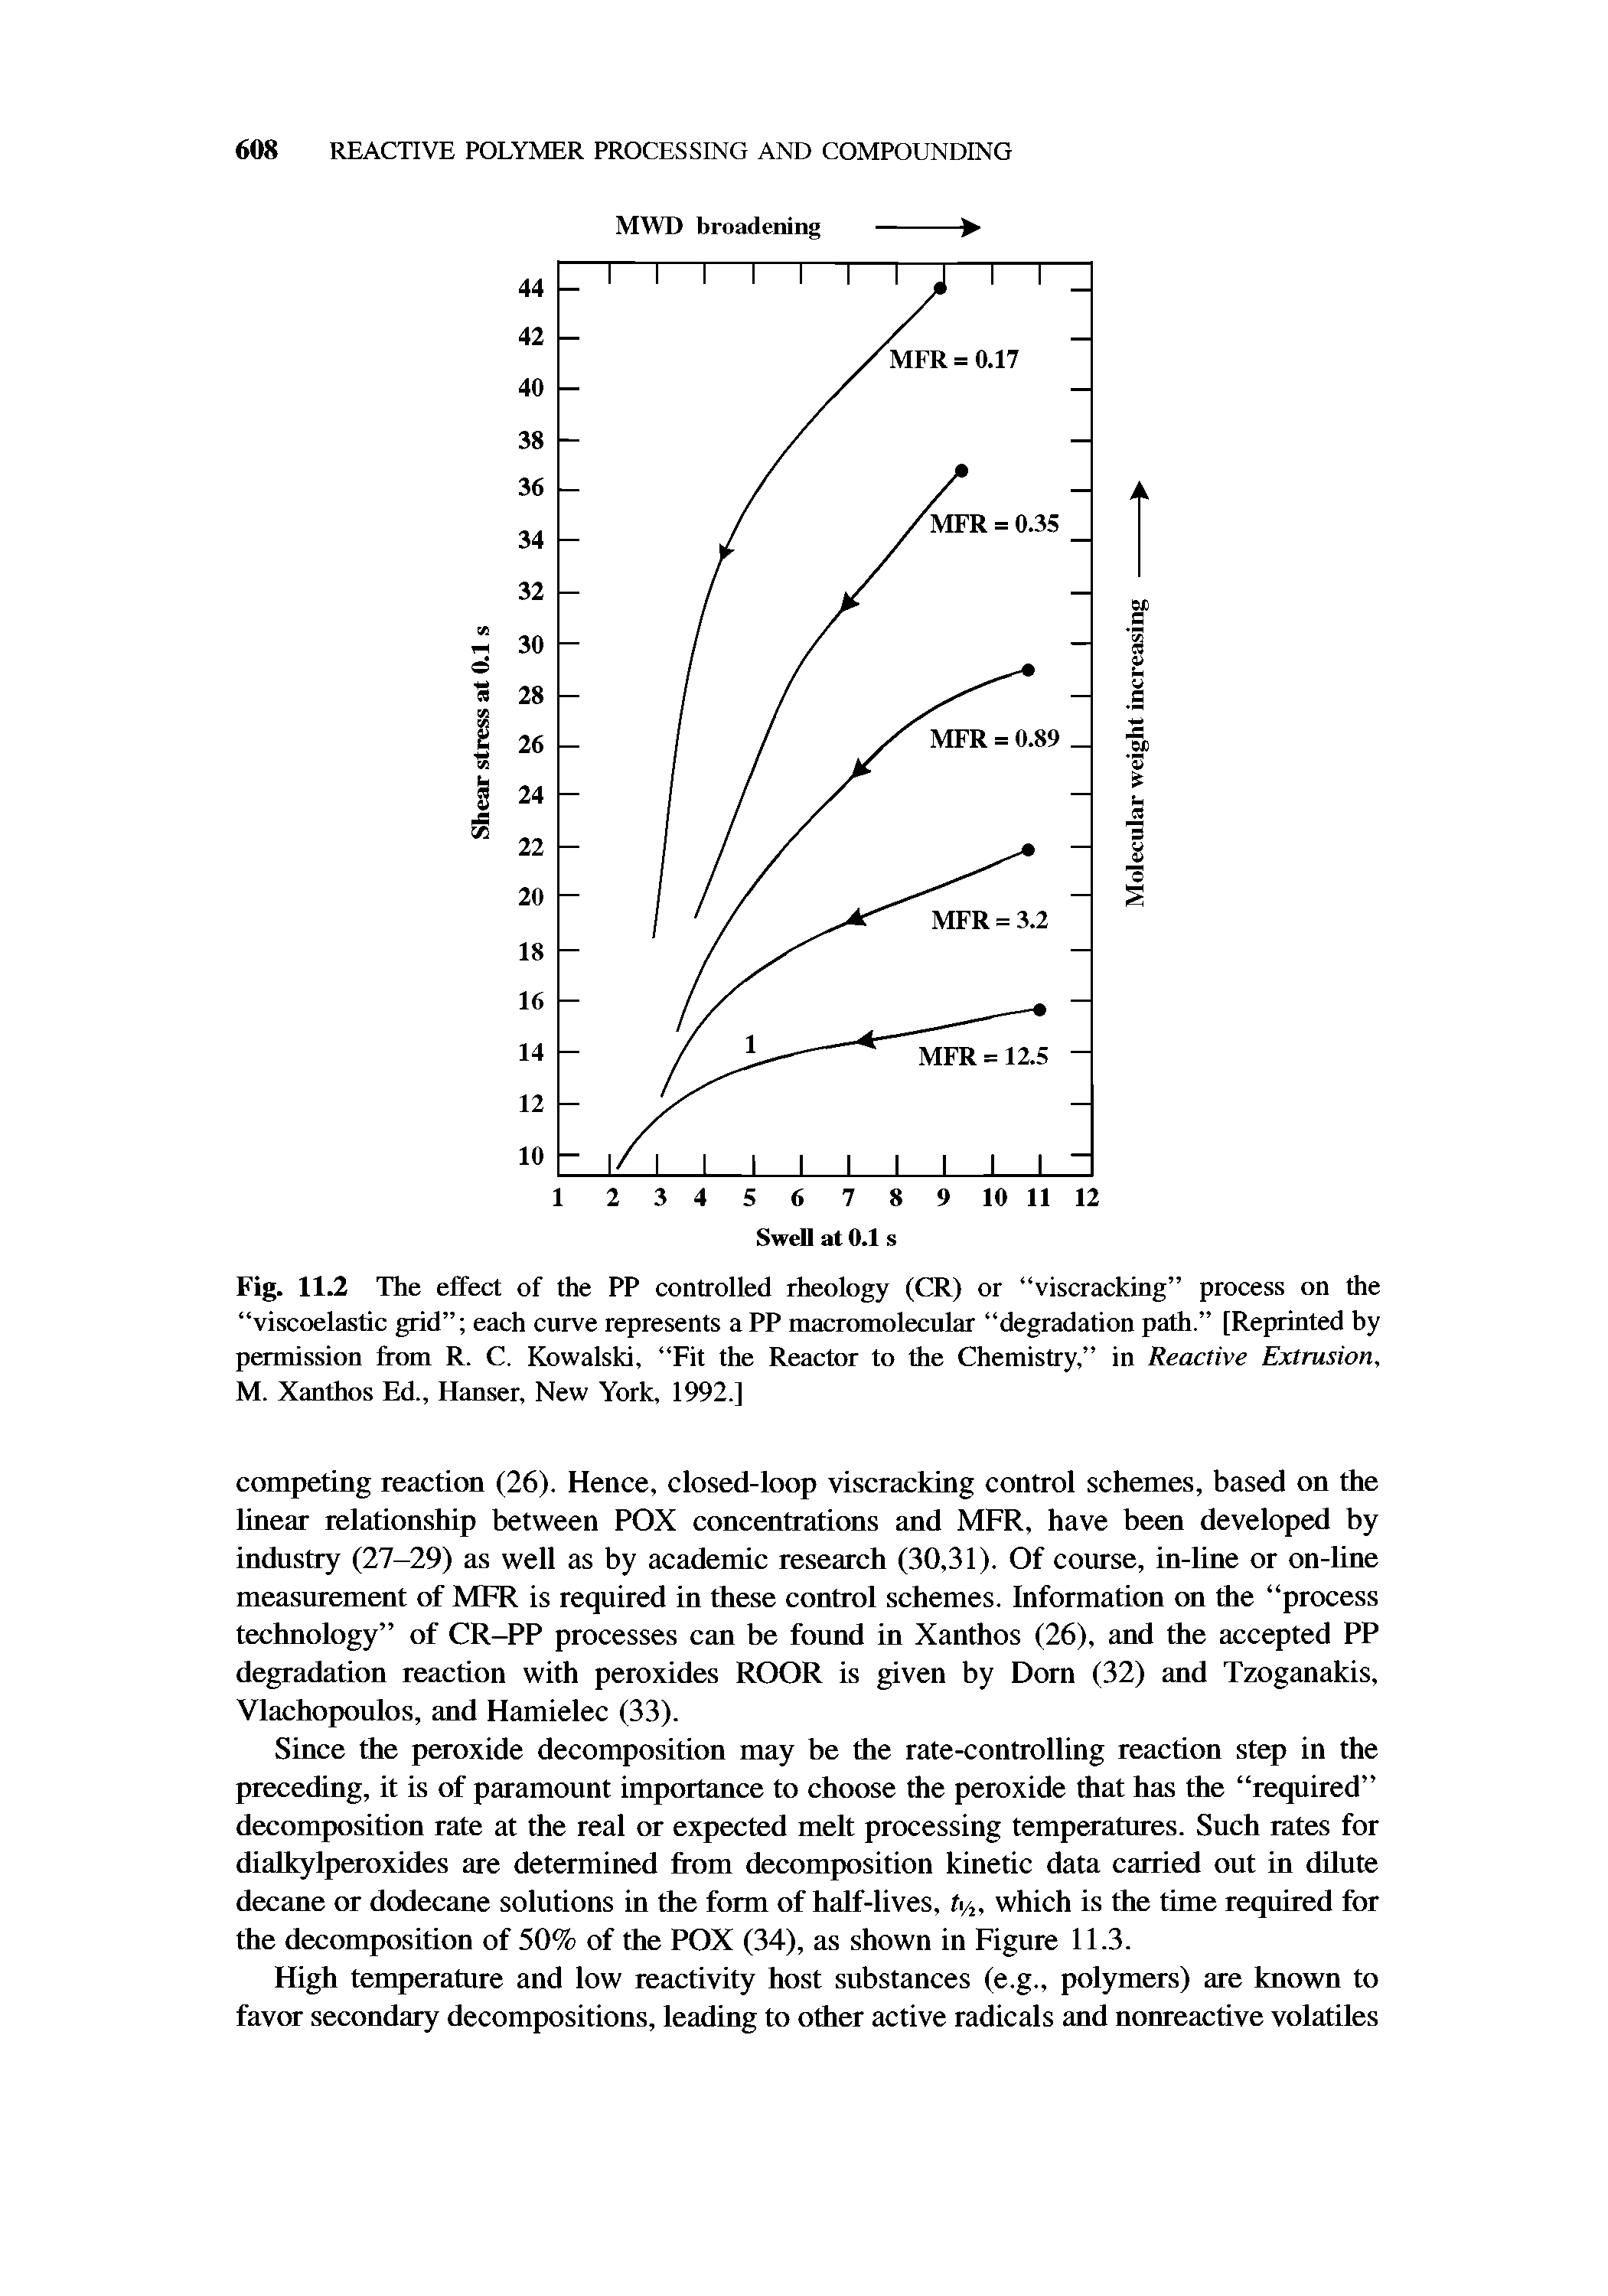 Fig. 11.2 The effect of the PP controlled rheology (CR) or viscracking process on the viscoelastic grid each curve represents a PP macromolecular degradation path. [Reprinted by permission from R. C. Kowalski, Fit the Reactor to the Chemistry, in Reactive Extrusion, M. Xanthos Ed., Hanser, New York, 1992.]...